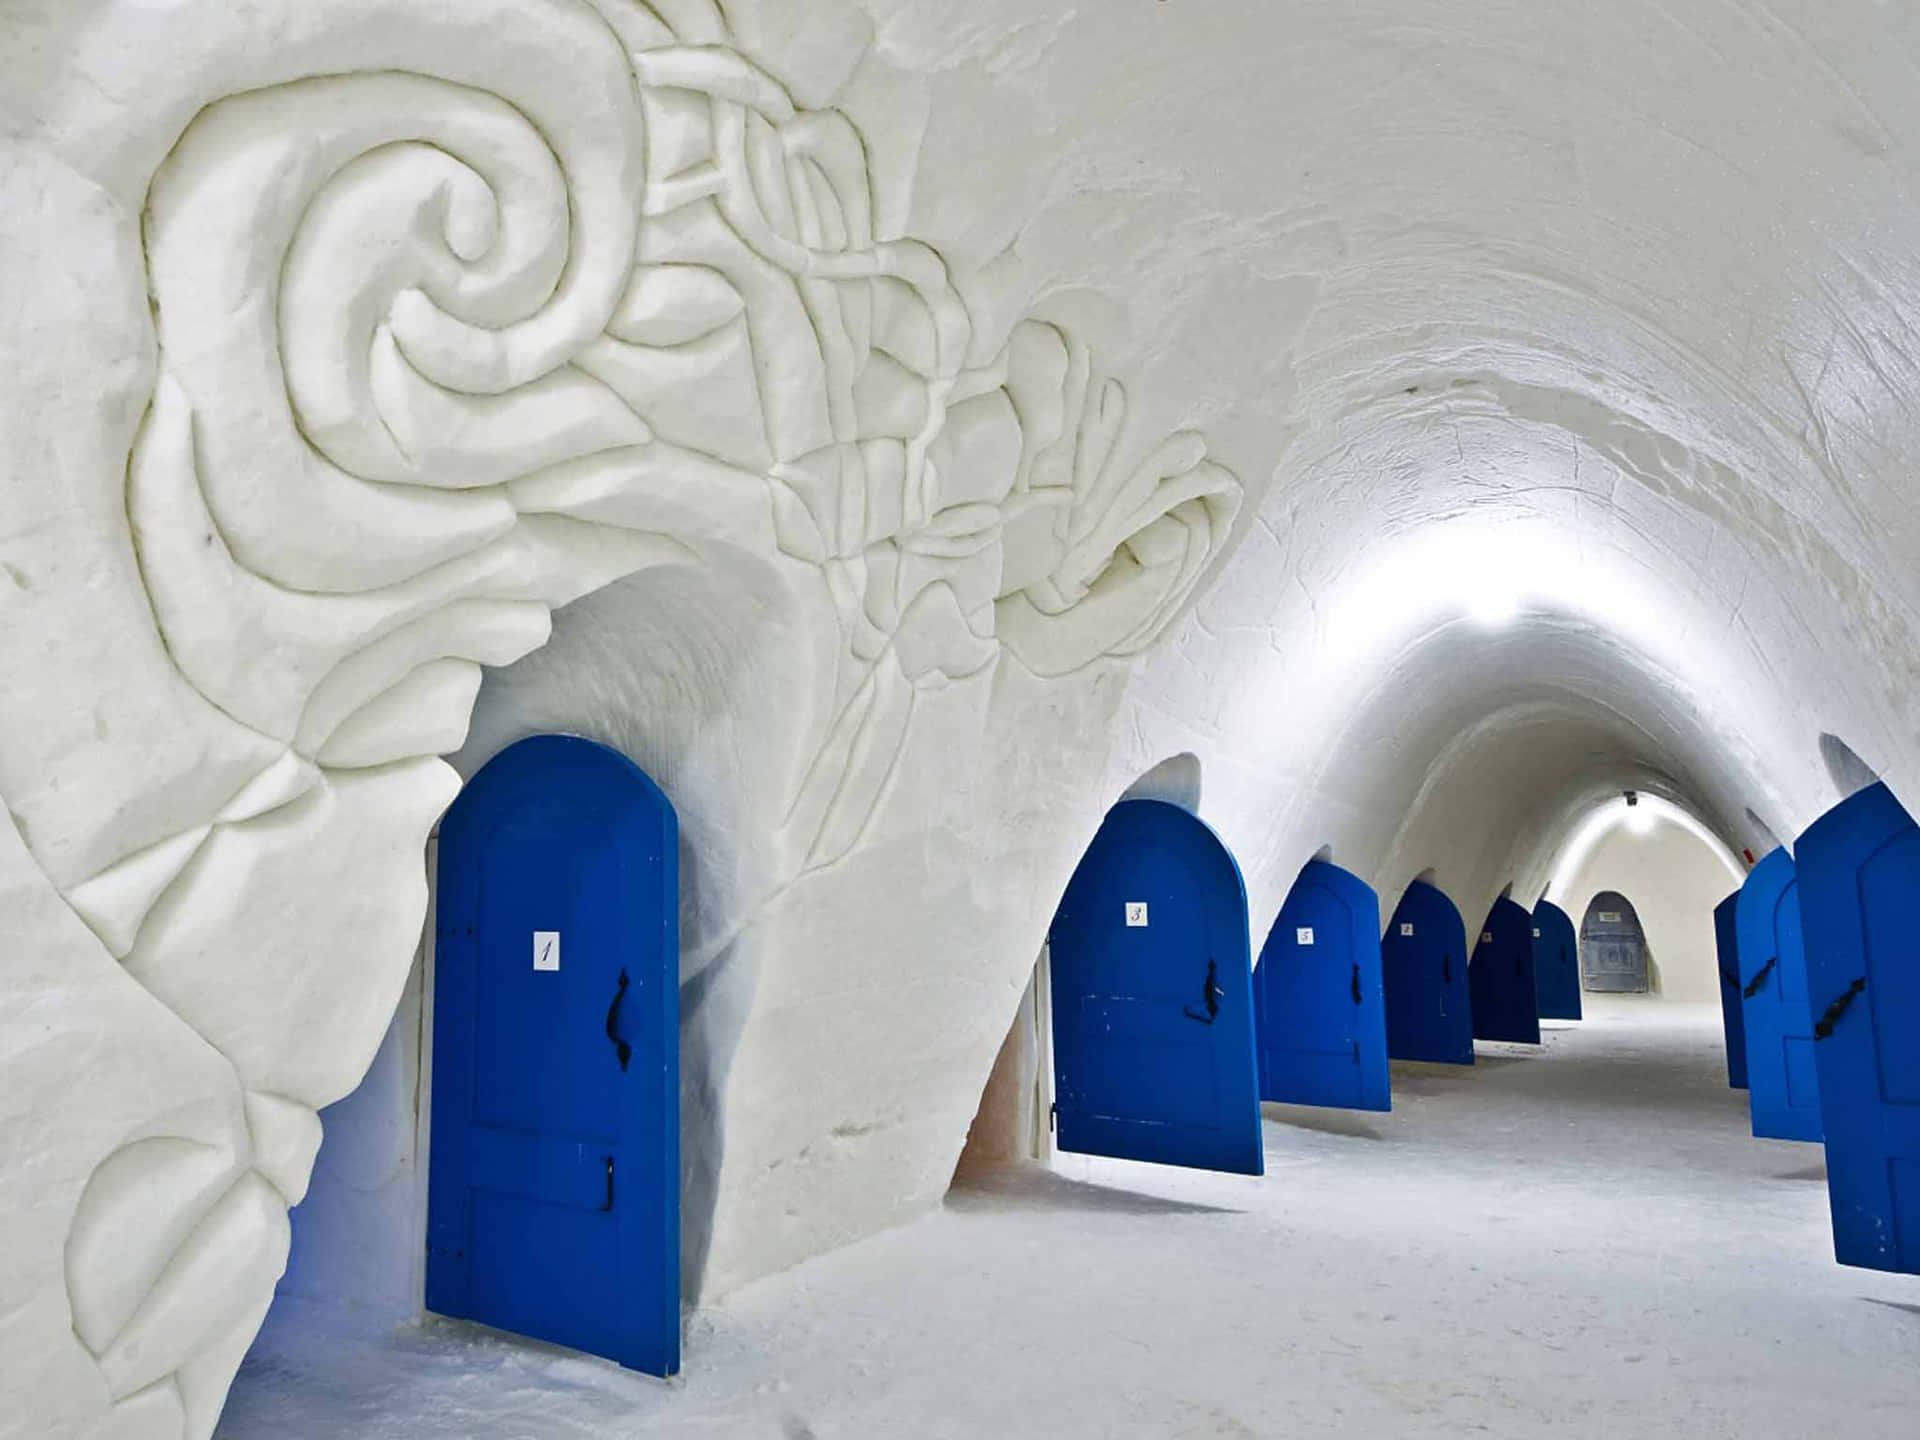 Caption: Magnificent Ice Hotel Suite at Night Wallpaper